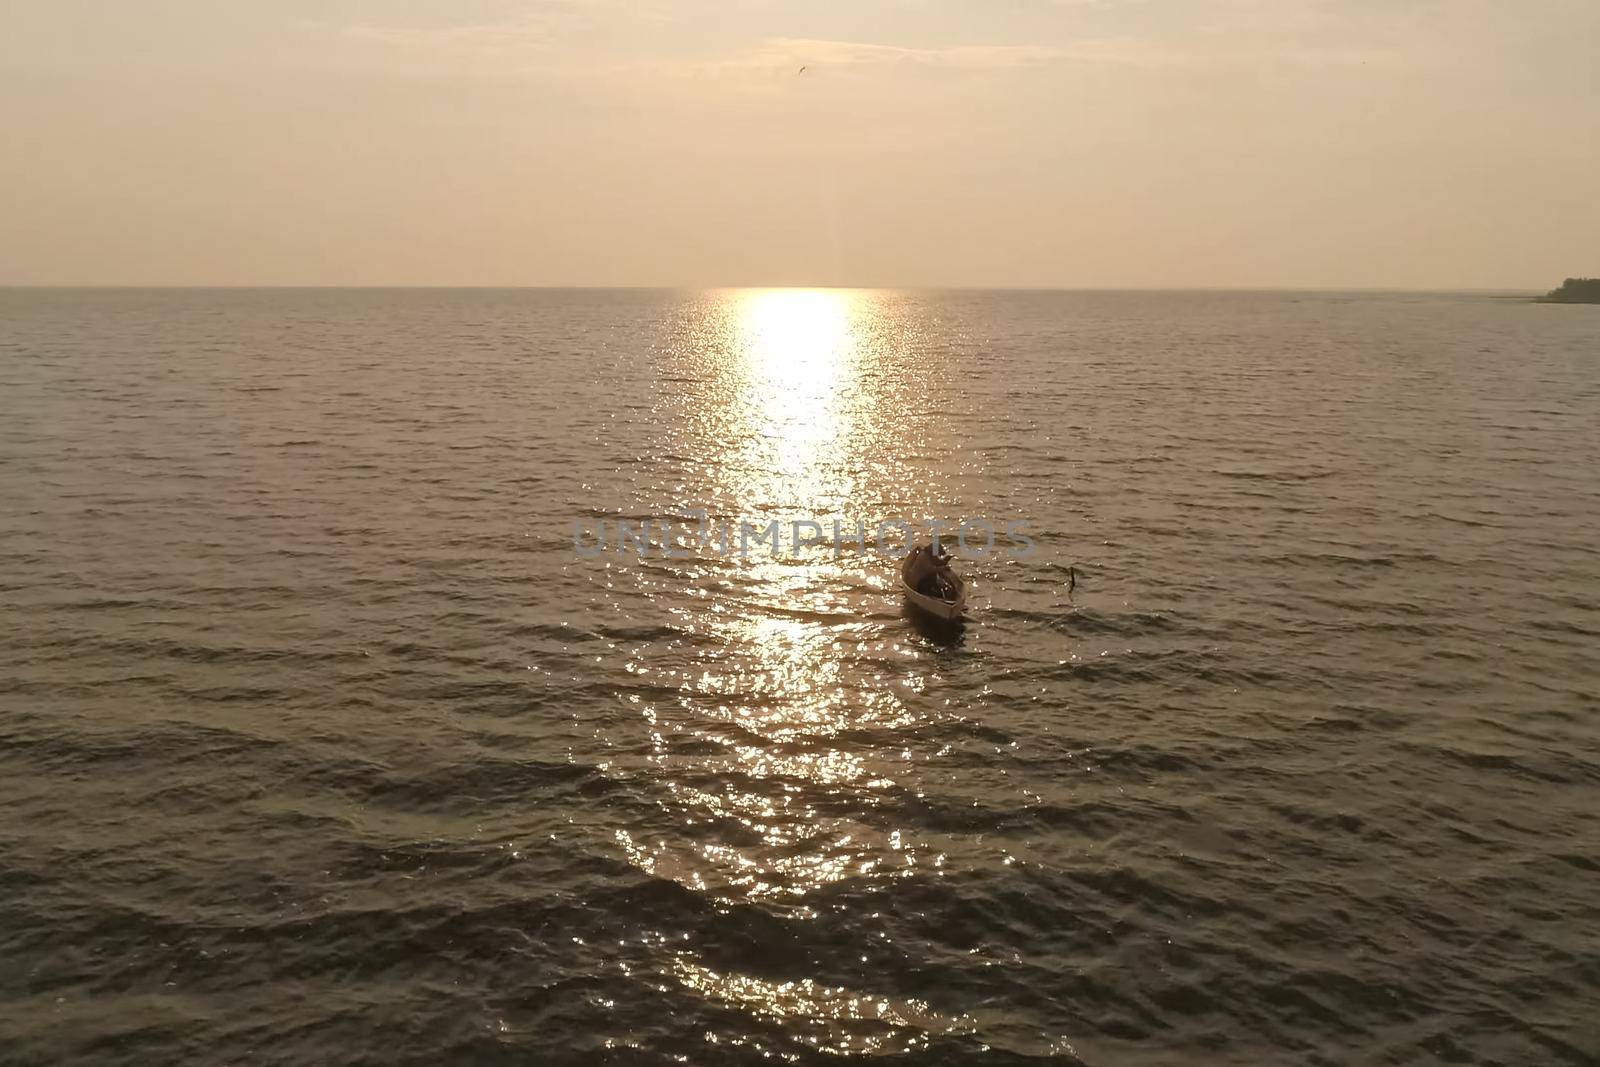 A fisherman in a boat in the sea against the sunset.